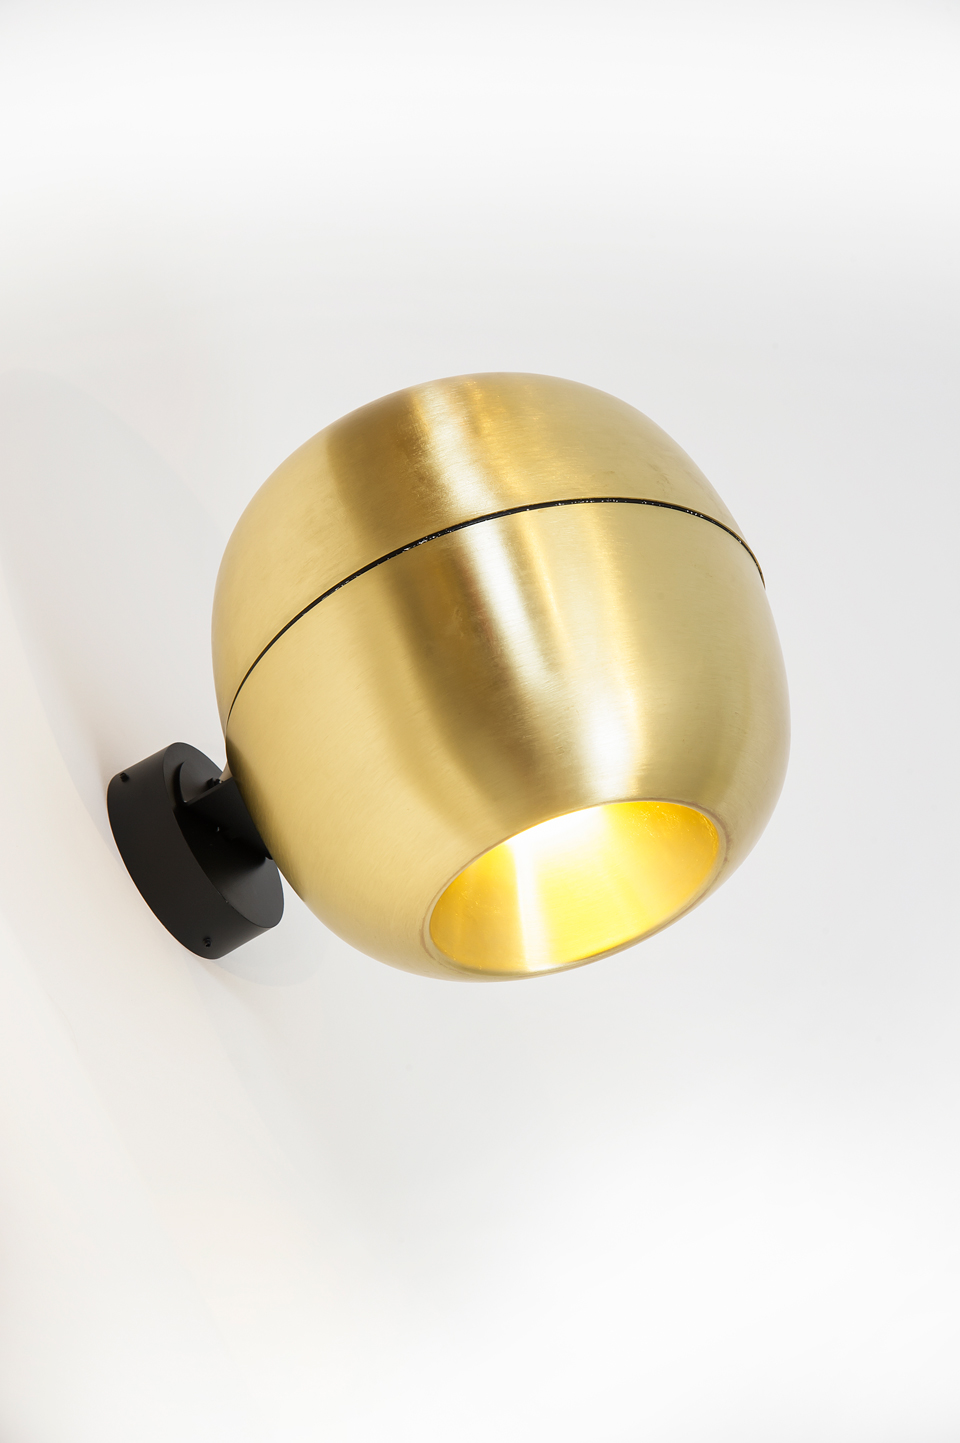 Wall light in the shape of a small golden apple. Dark. 